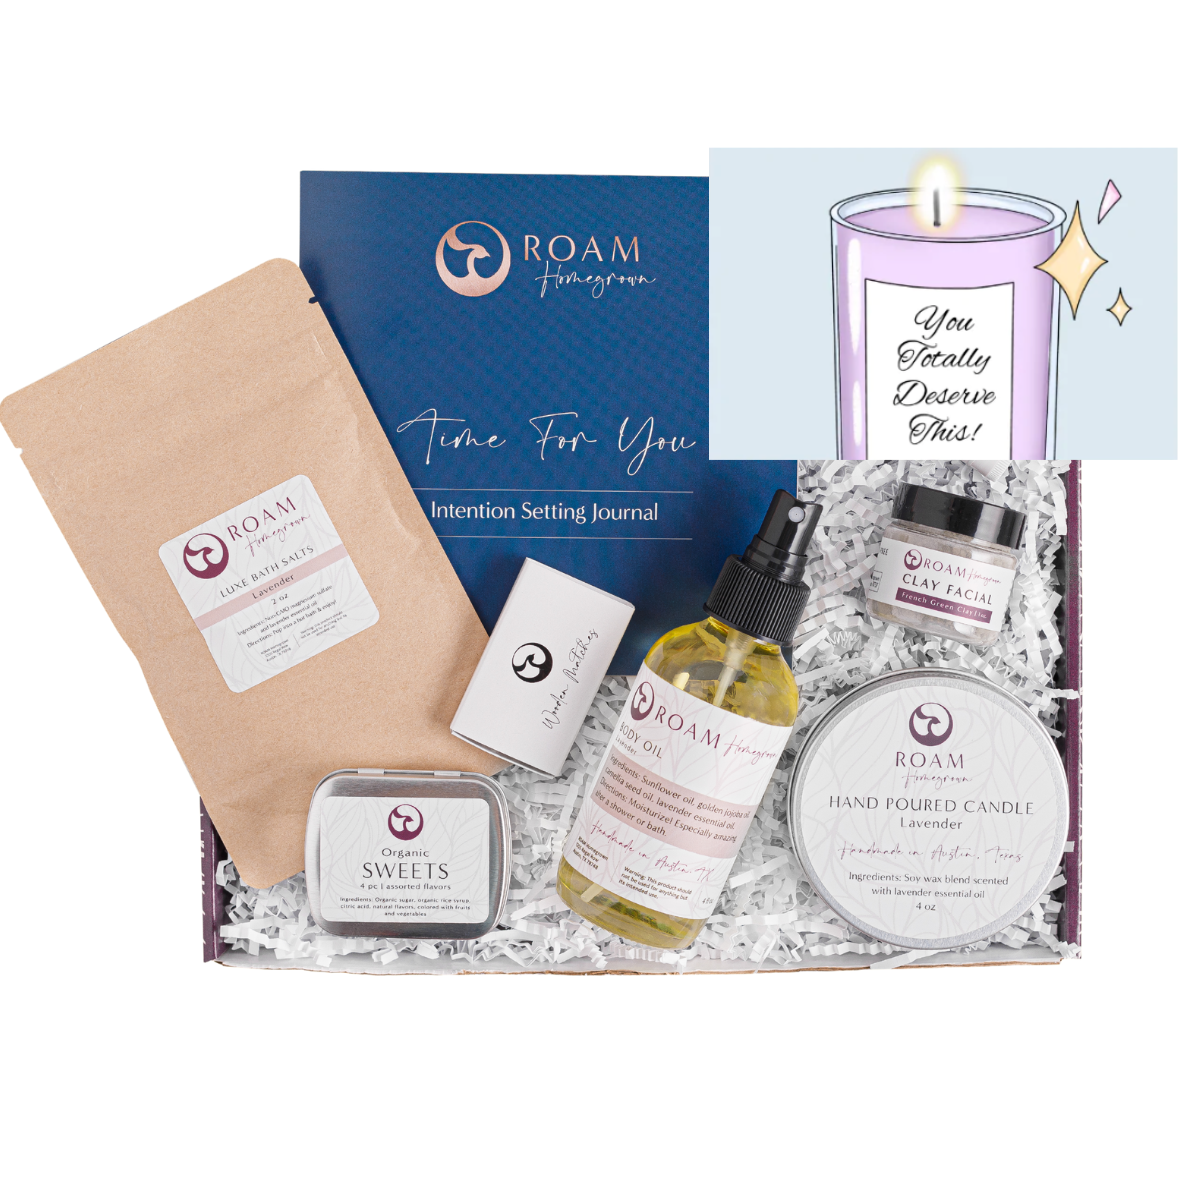 self care gift box with personalized greeting card from you